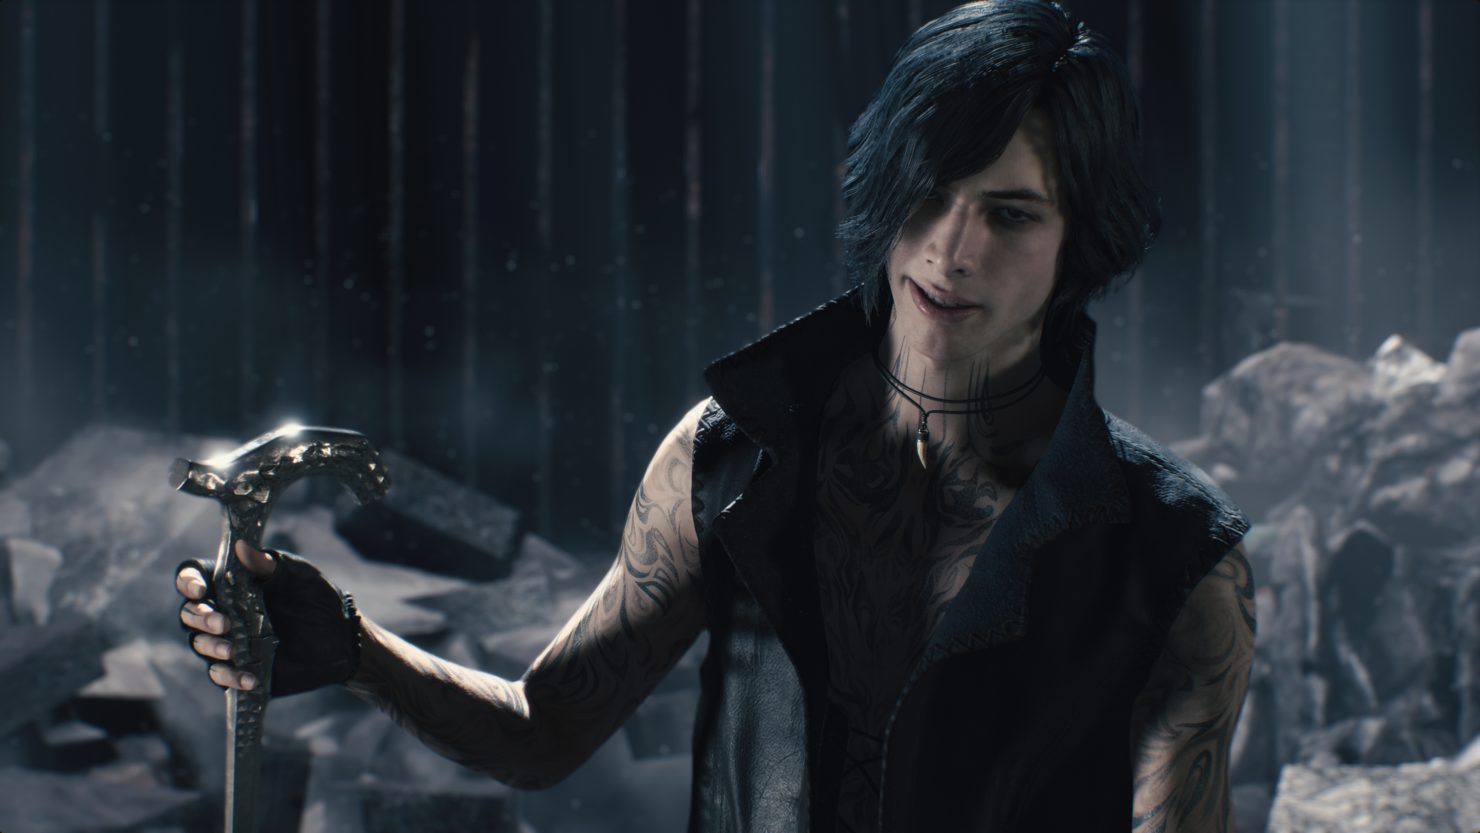 Image for Devil May Cry 5 demo available to download now on PS4 and Xbox One